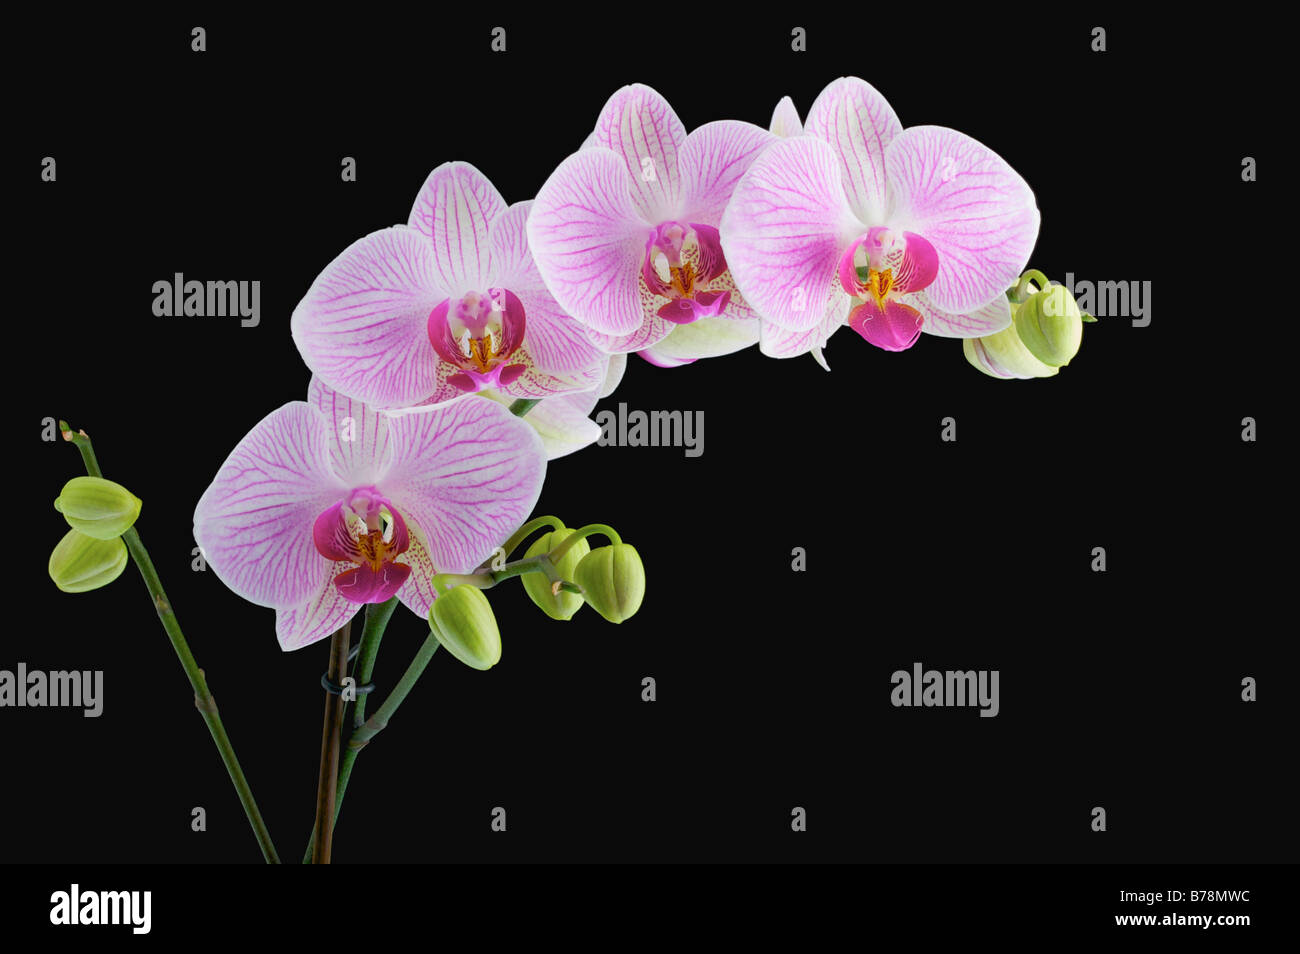 Phalaenopsis Orchid or moth orchid pink flowering plant full heads mothers day gift poster lovers plant black background Stock Photo